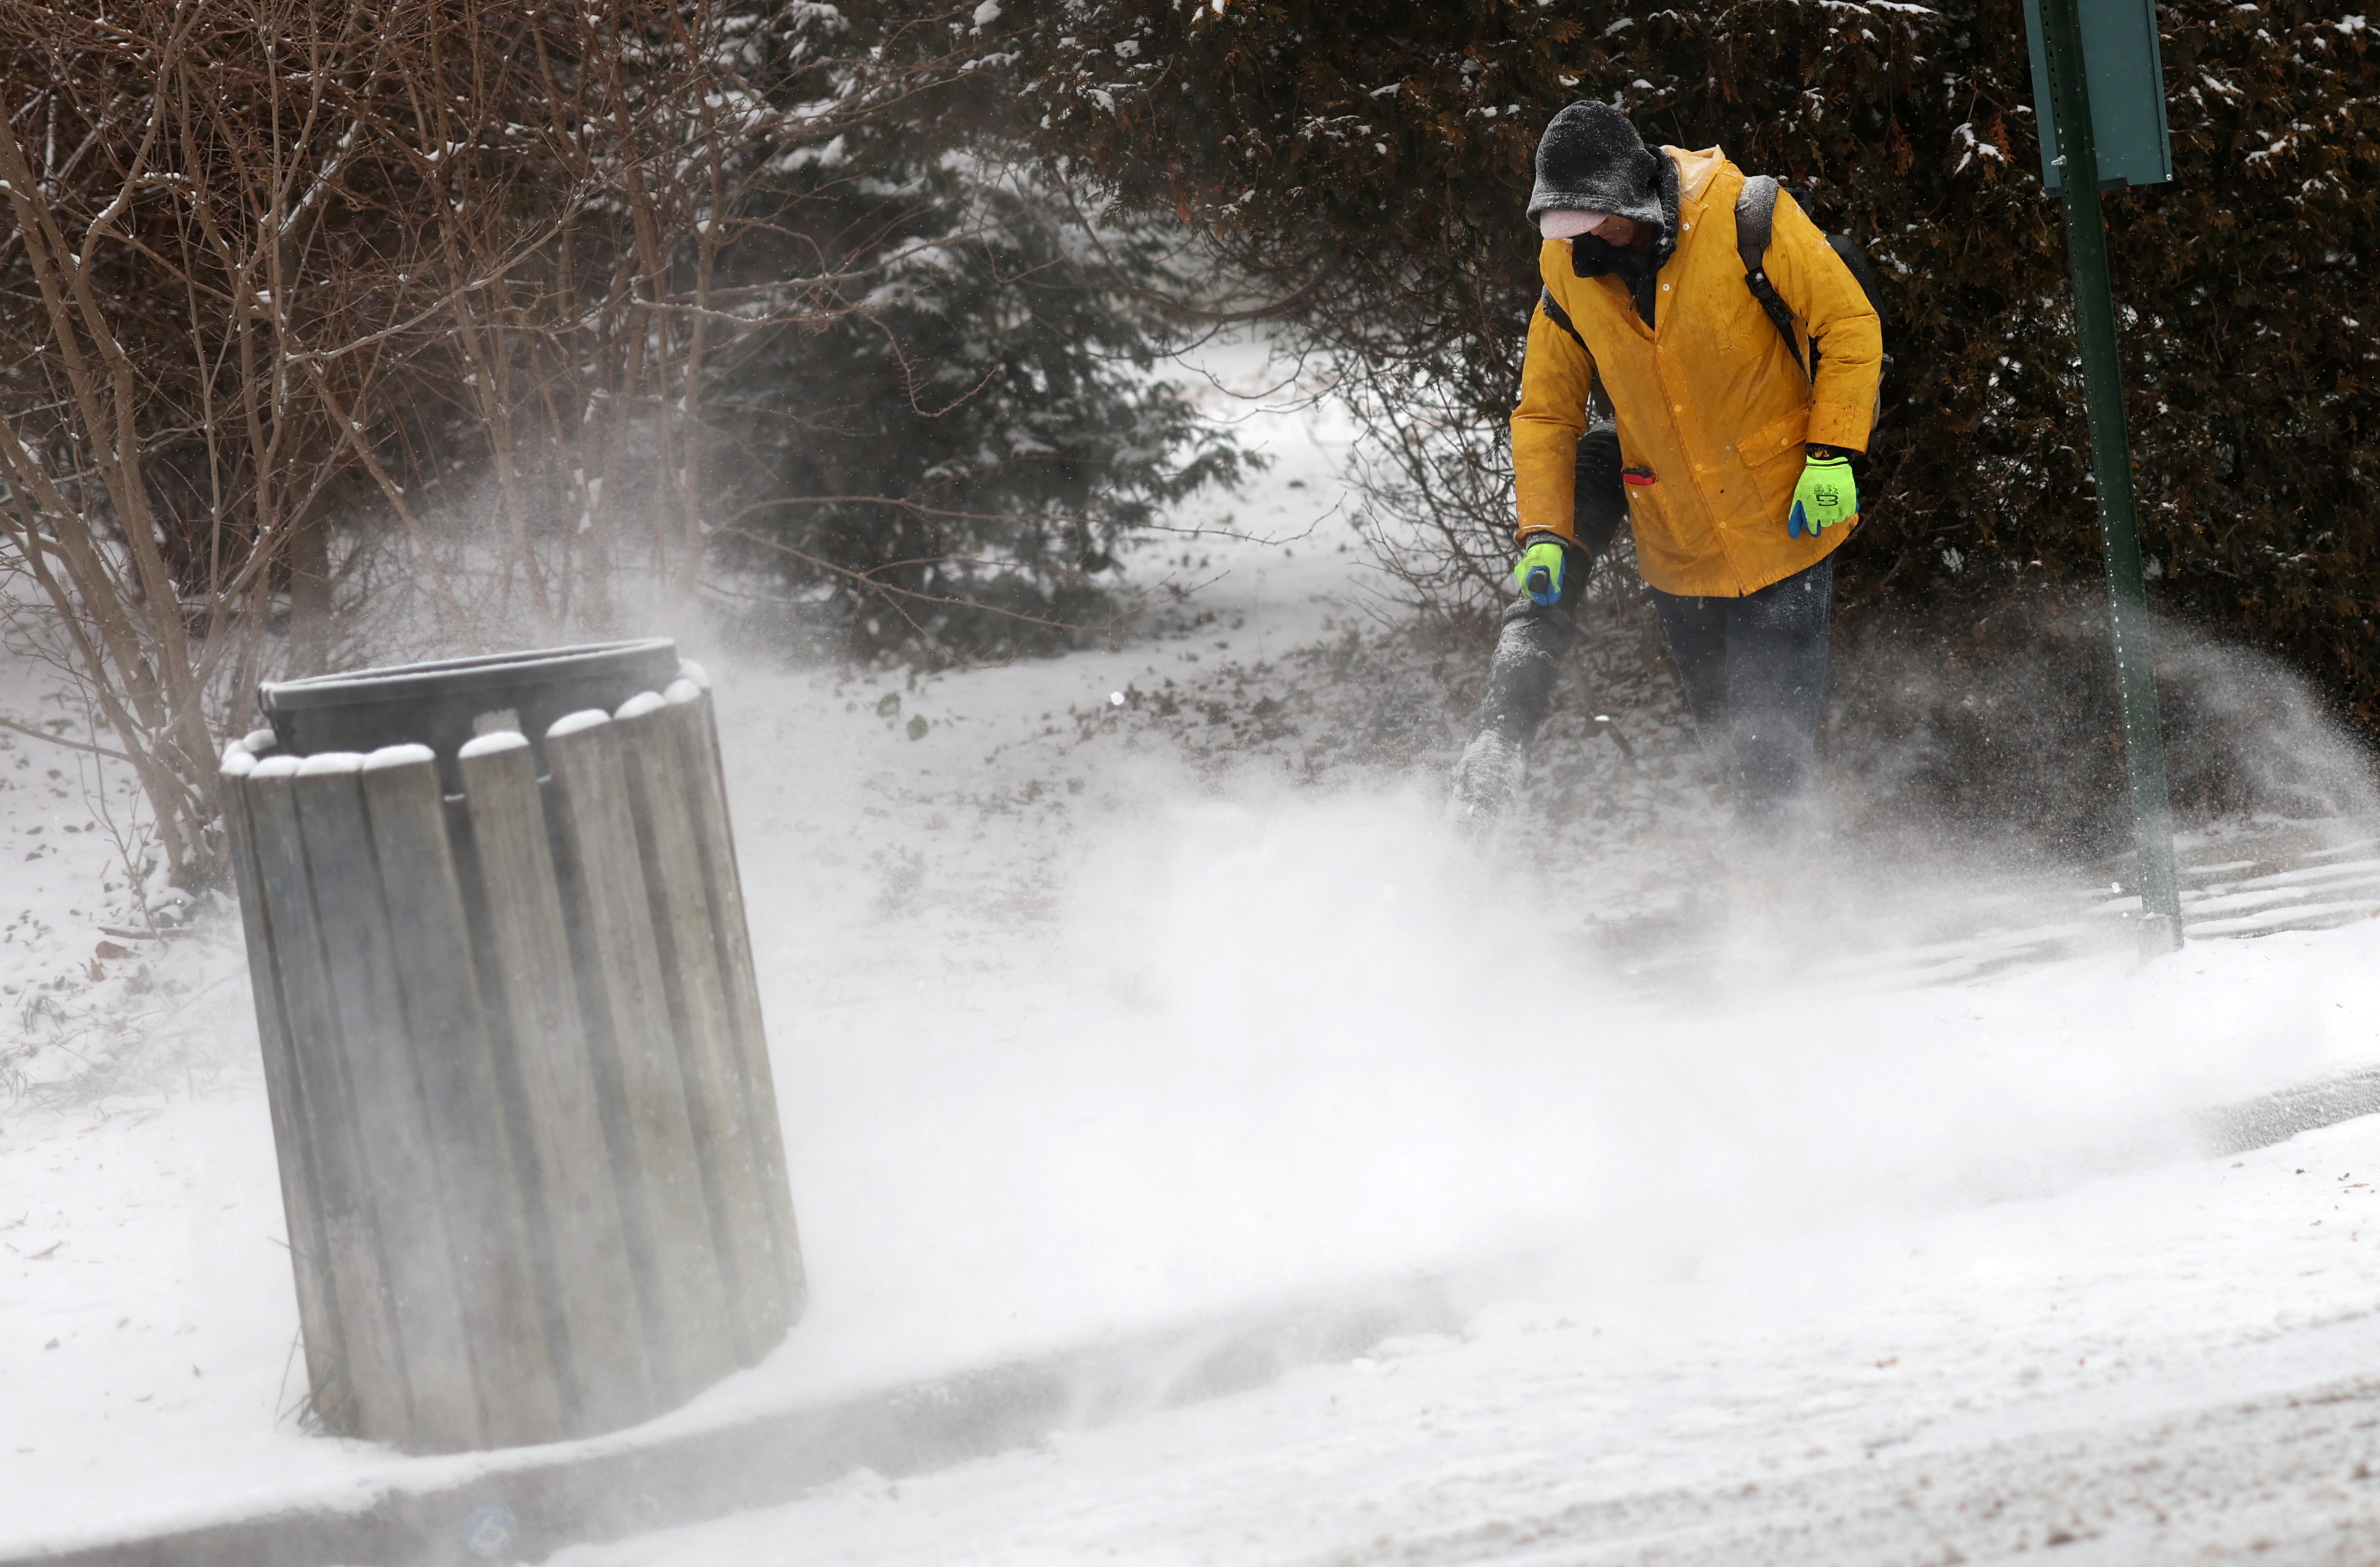 Man blows snow off sidewalk during winter weather in New York City suburb of Nyack